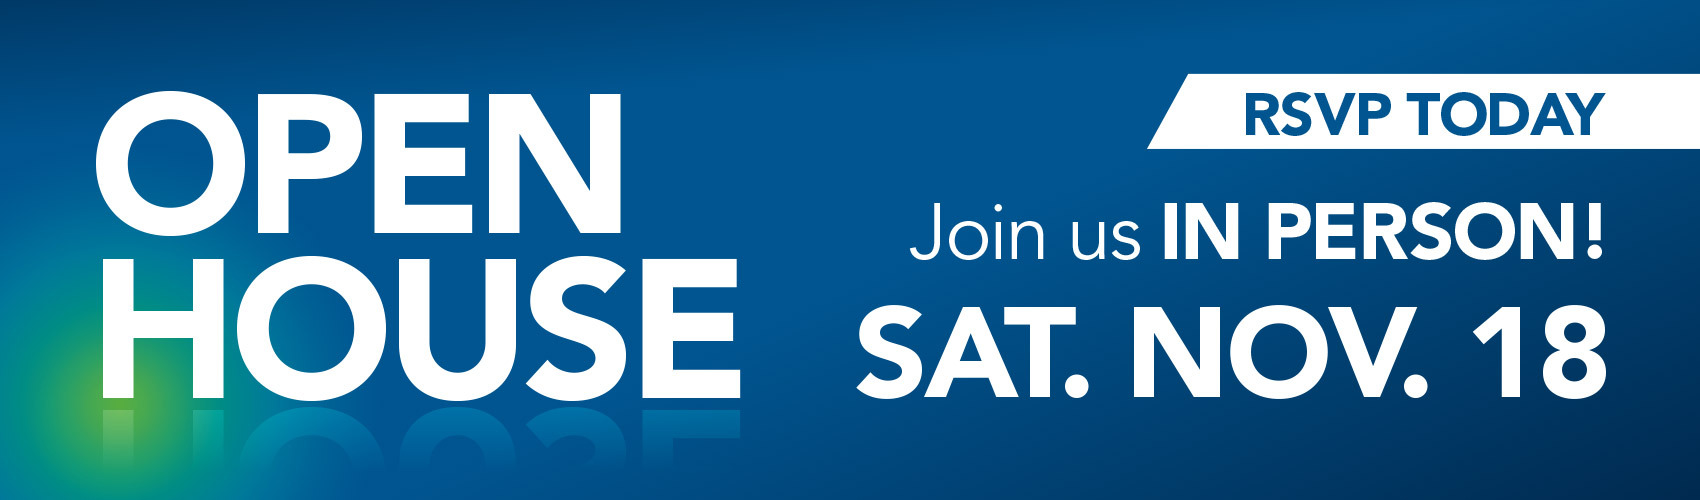 OPEN HOUSE | RSVP TODAY | Join us IN PERSON! SAT. NOV. 18